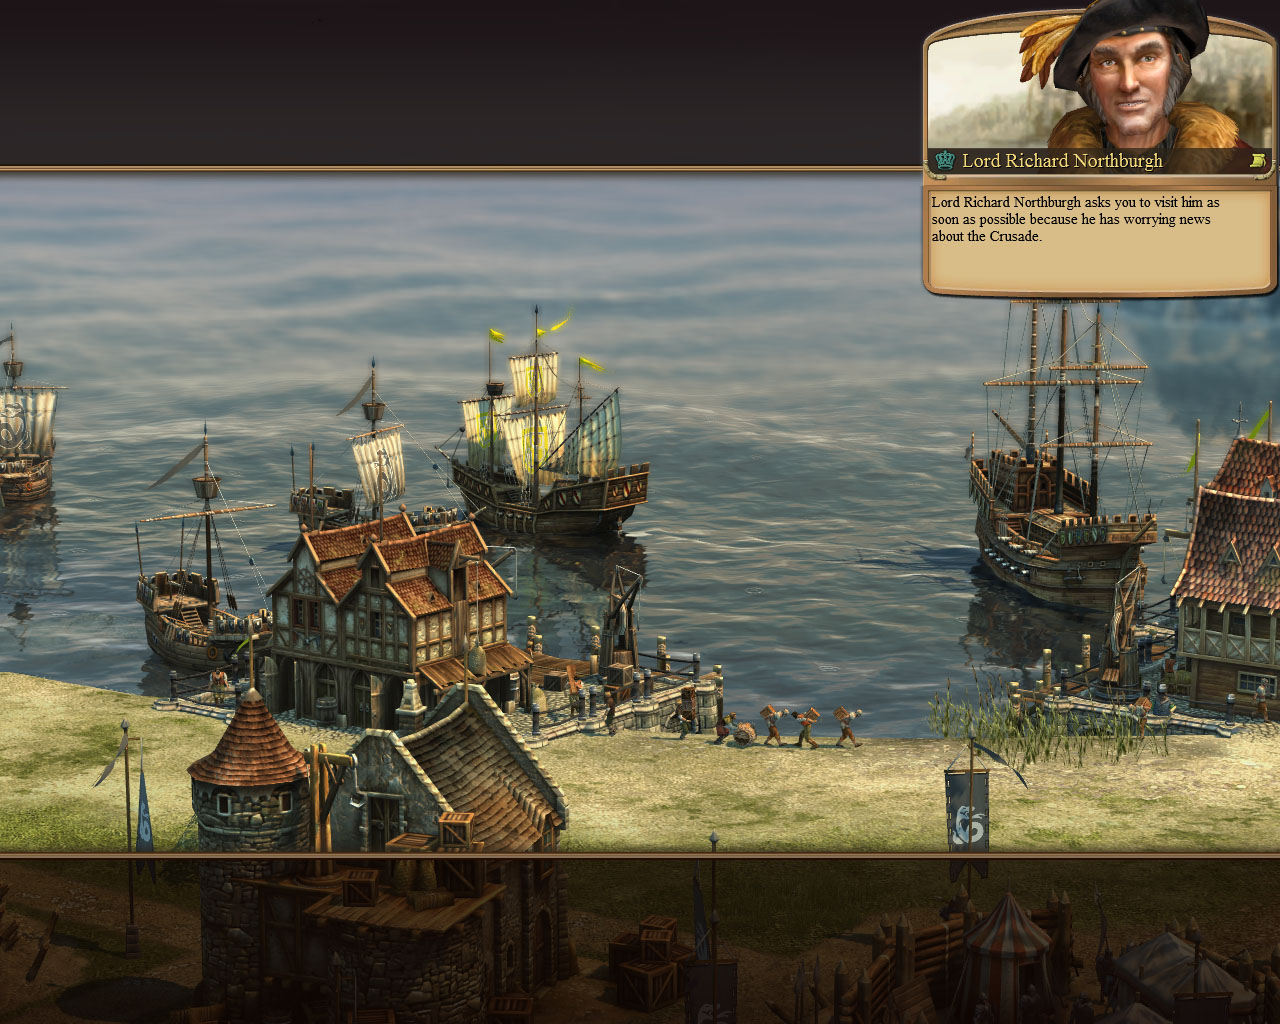 anno 1404 trade wood to ship at sea quest